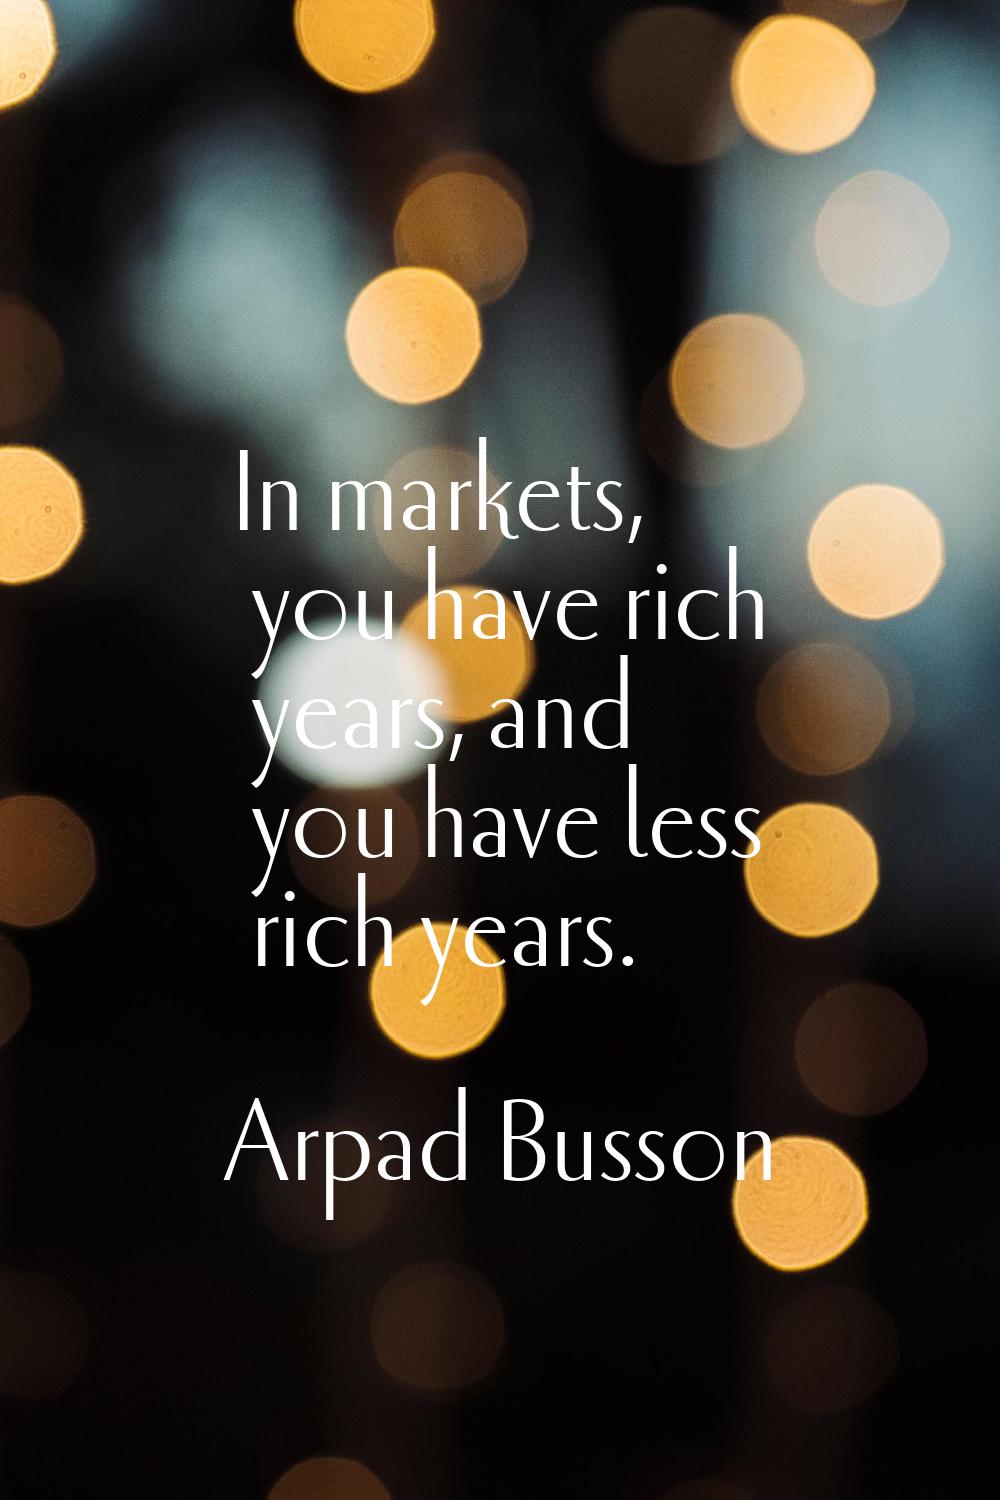 In markets, you have rich years, and you have less rich years.